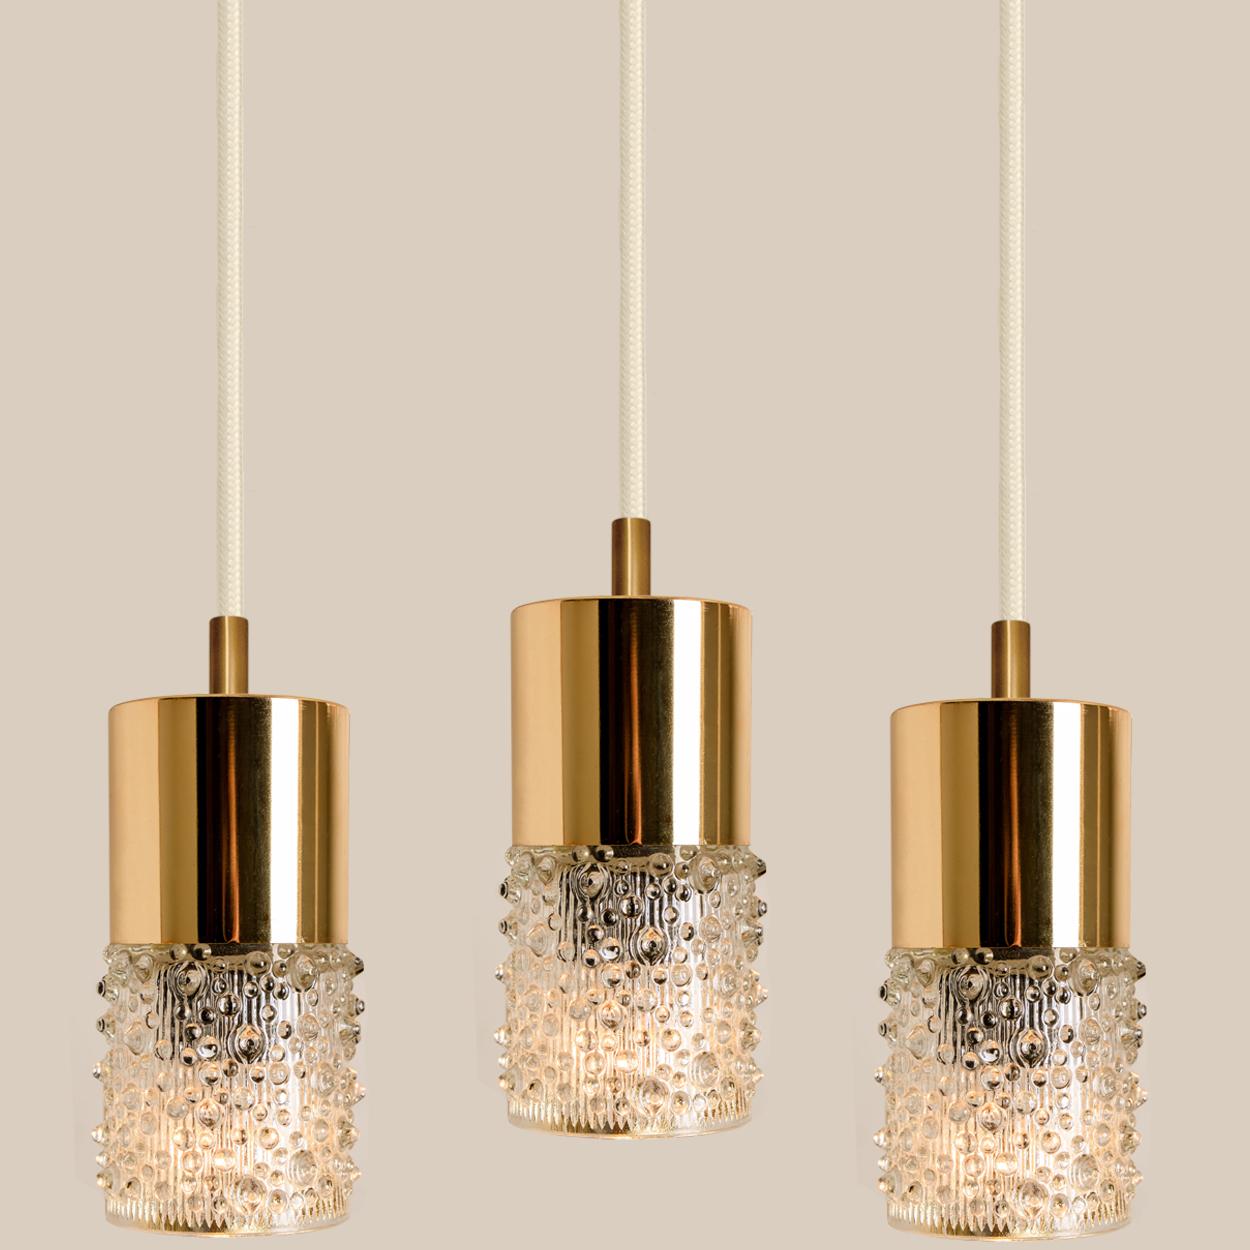 Pressed Glass and Brass Pendant Lights, 1970s For Sale 3